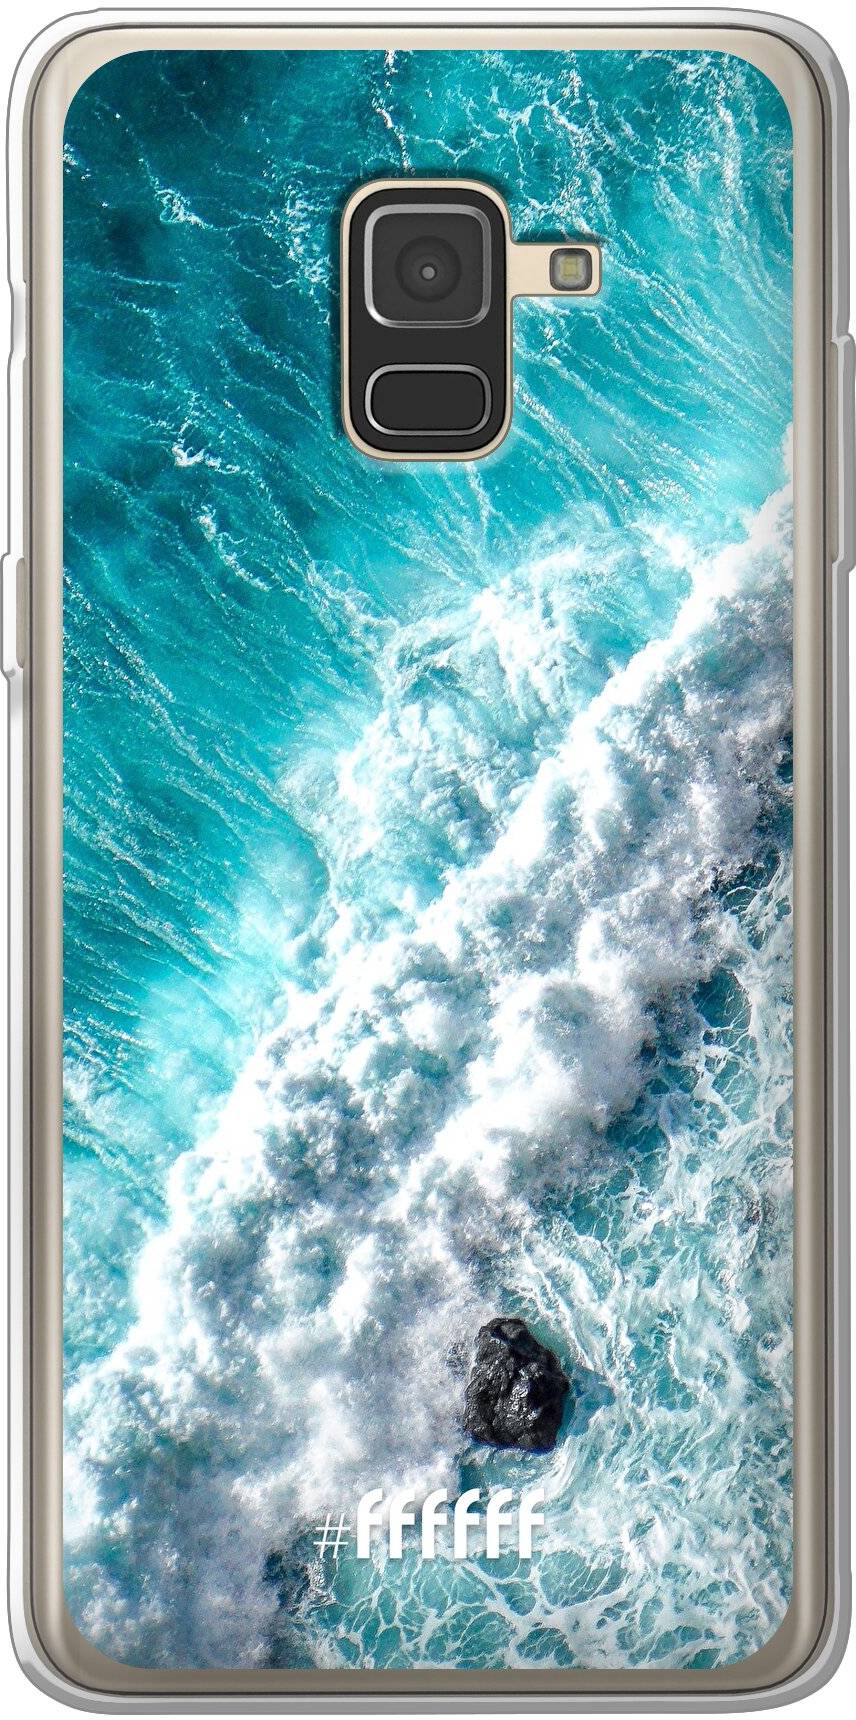 Perfect to Surf Galaxy A8 (2018)